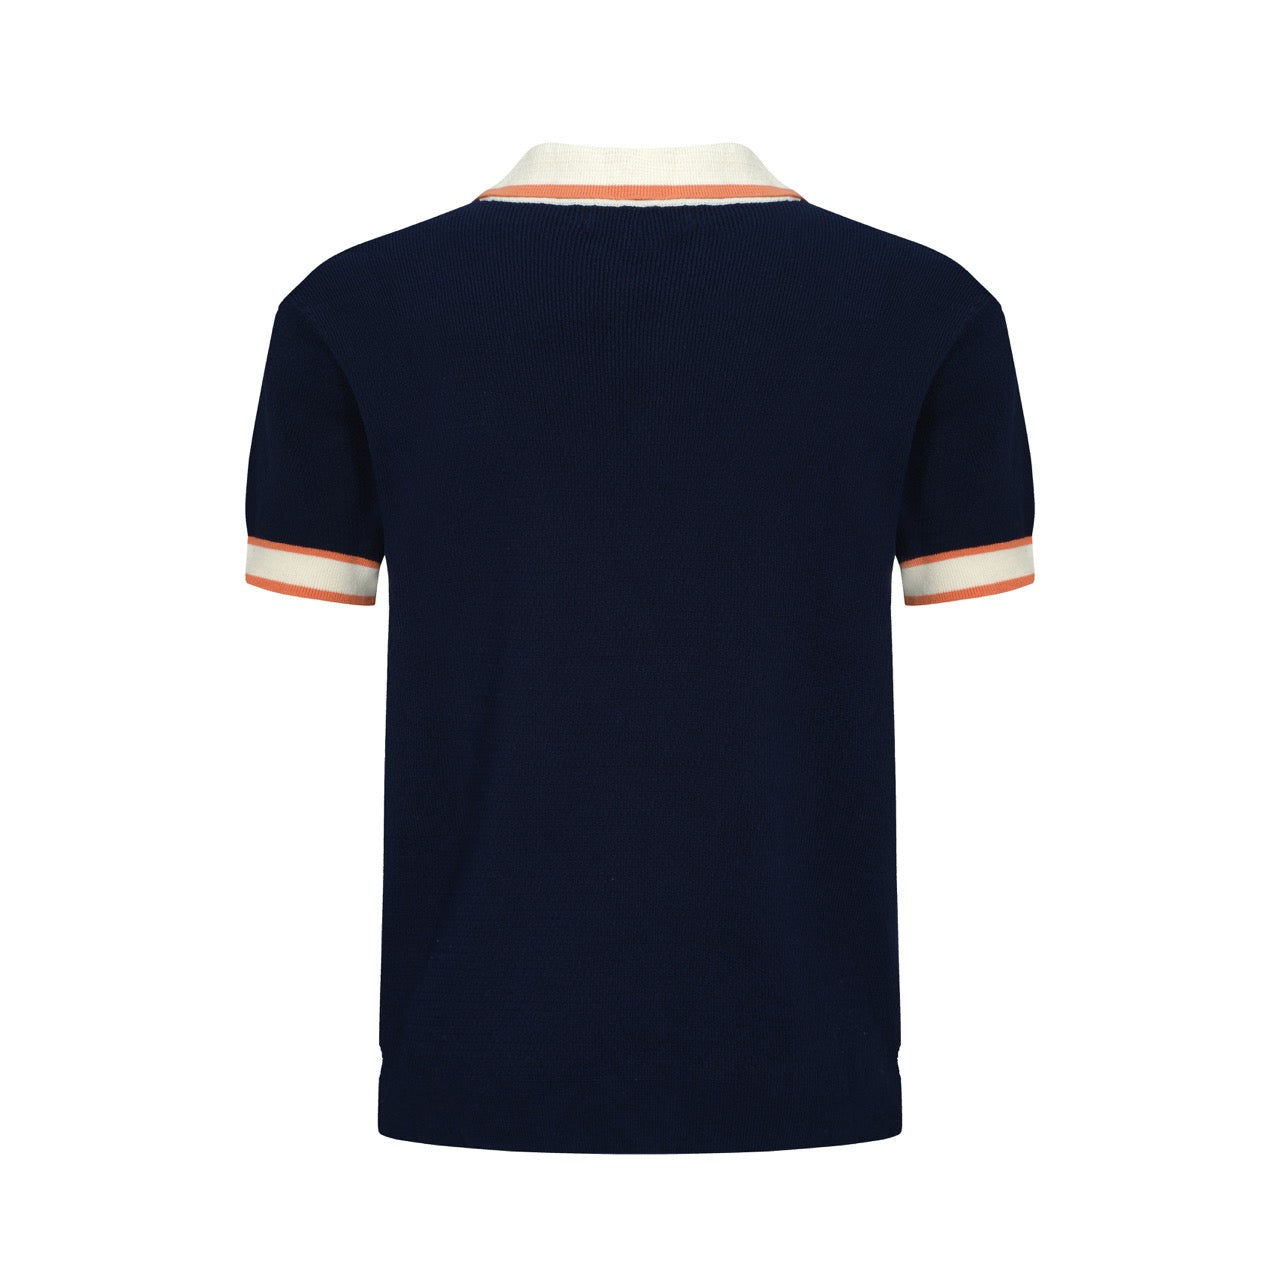 OXKNIT Men Vintage Clothing 1960s Mod Style Casual Navy Blue With Light Orange Line Knitted Retro Polo